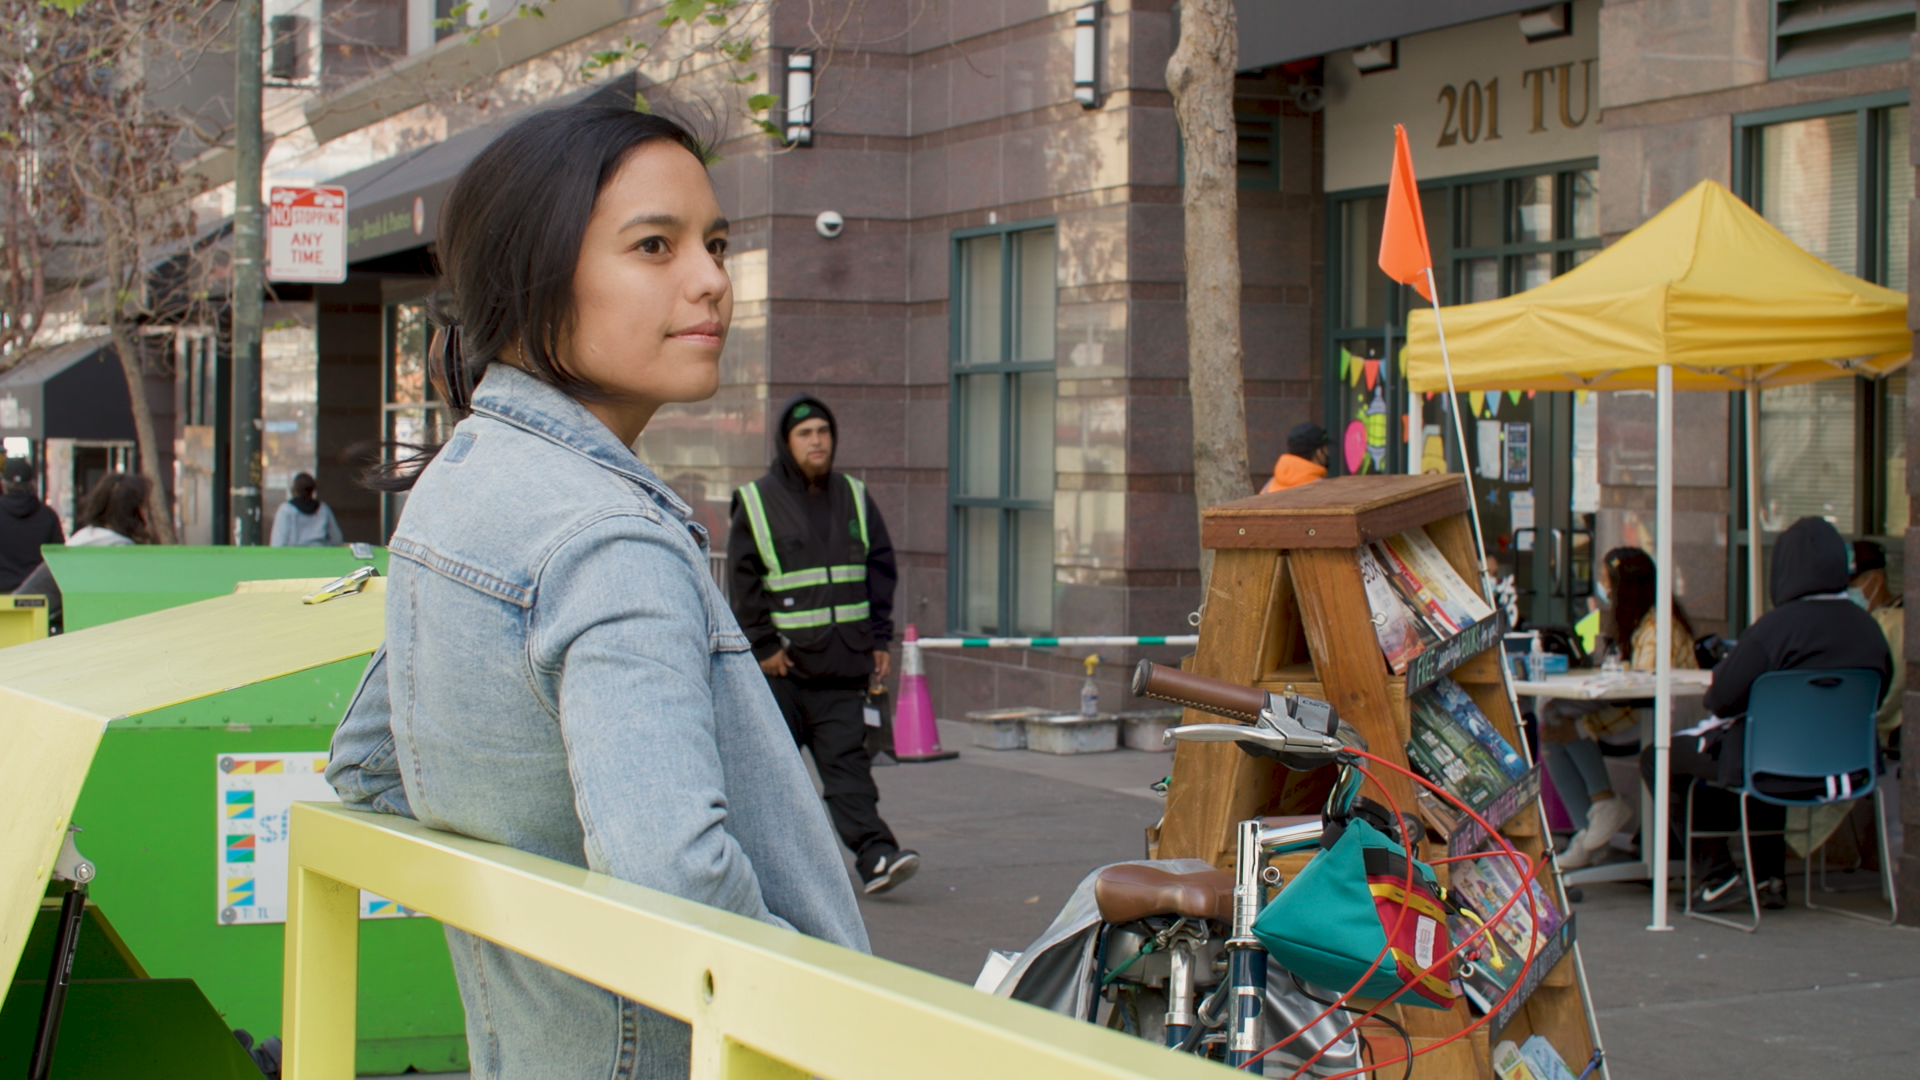 Bringing San Francisco Together With a ‘Little Library on Wheels’